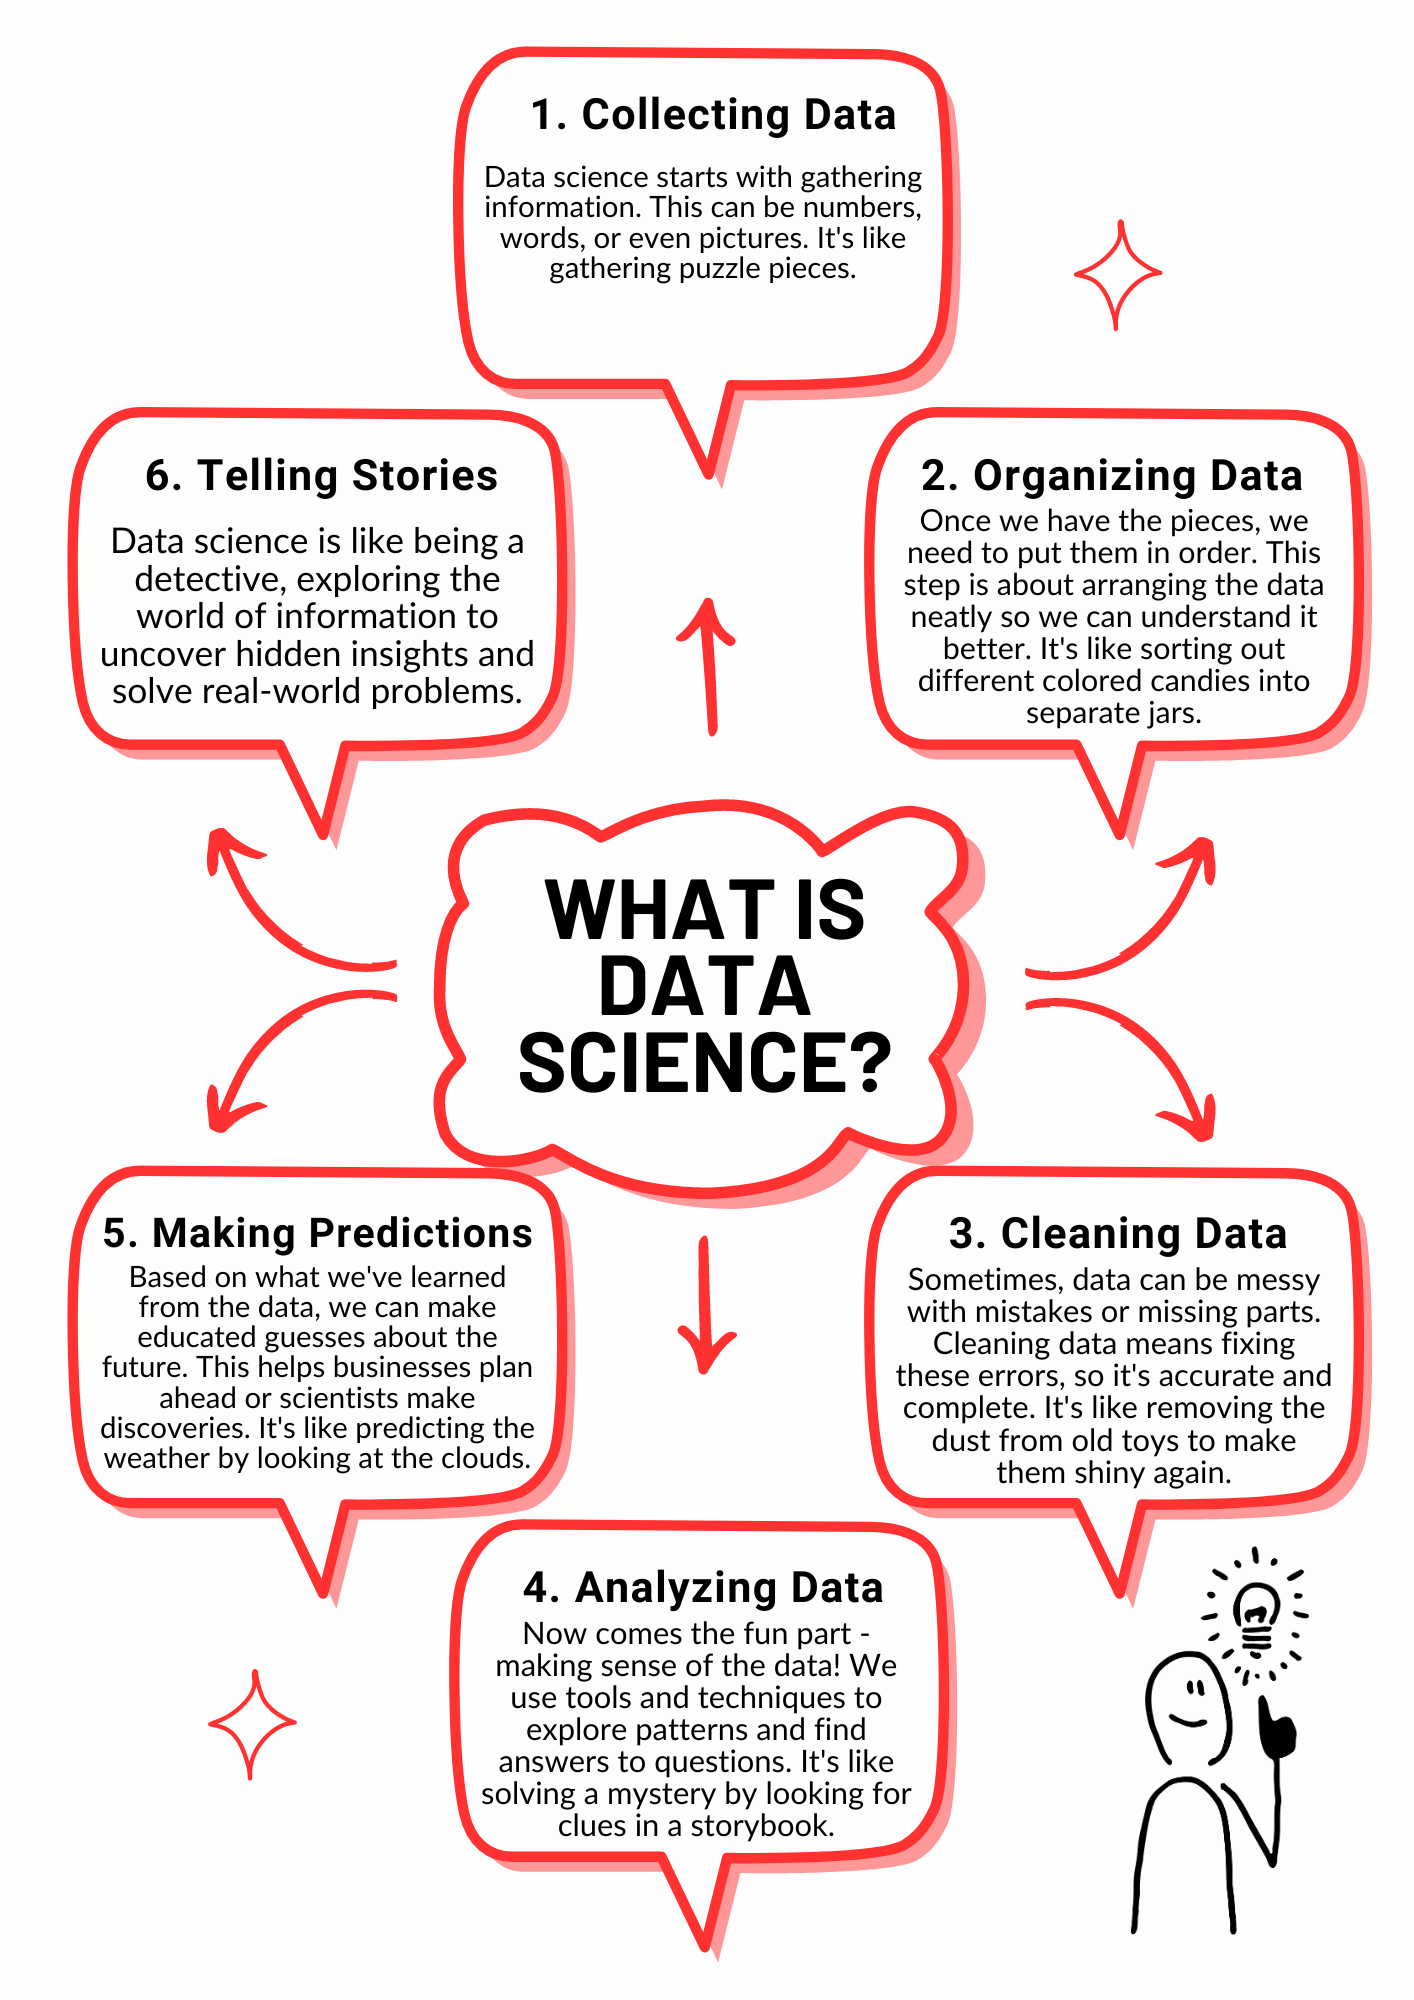 What is data science? What is the data science process?